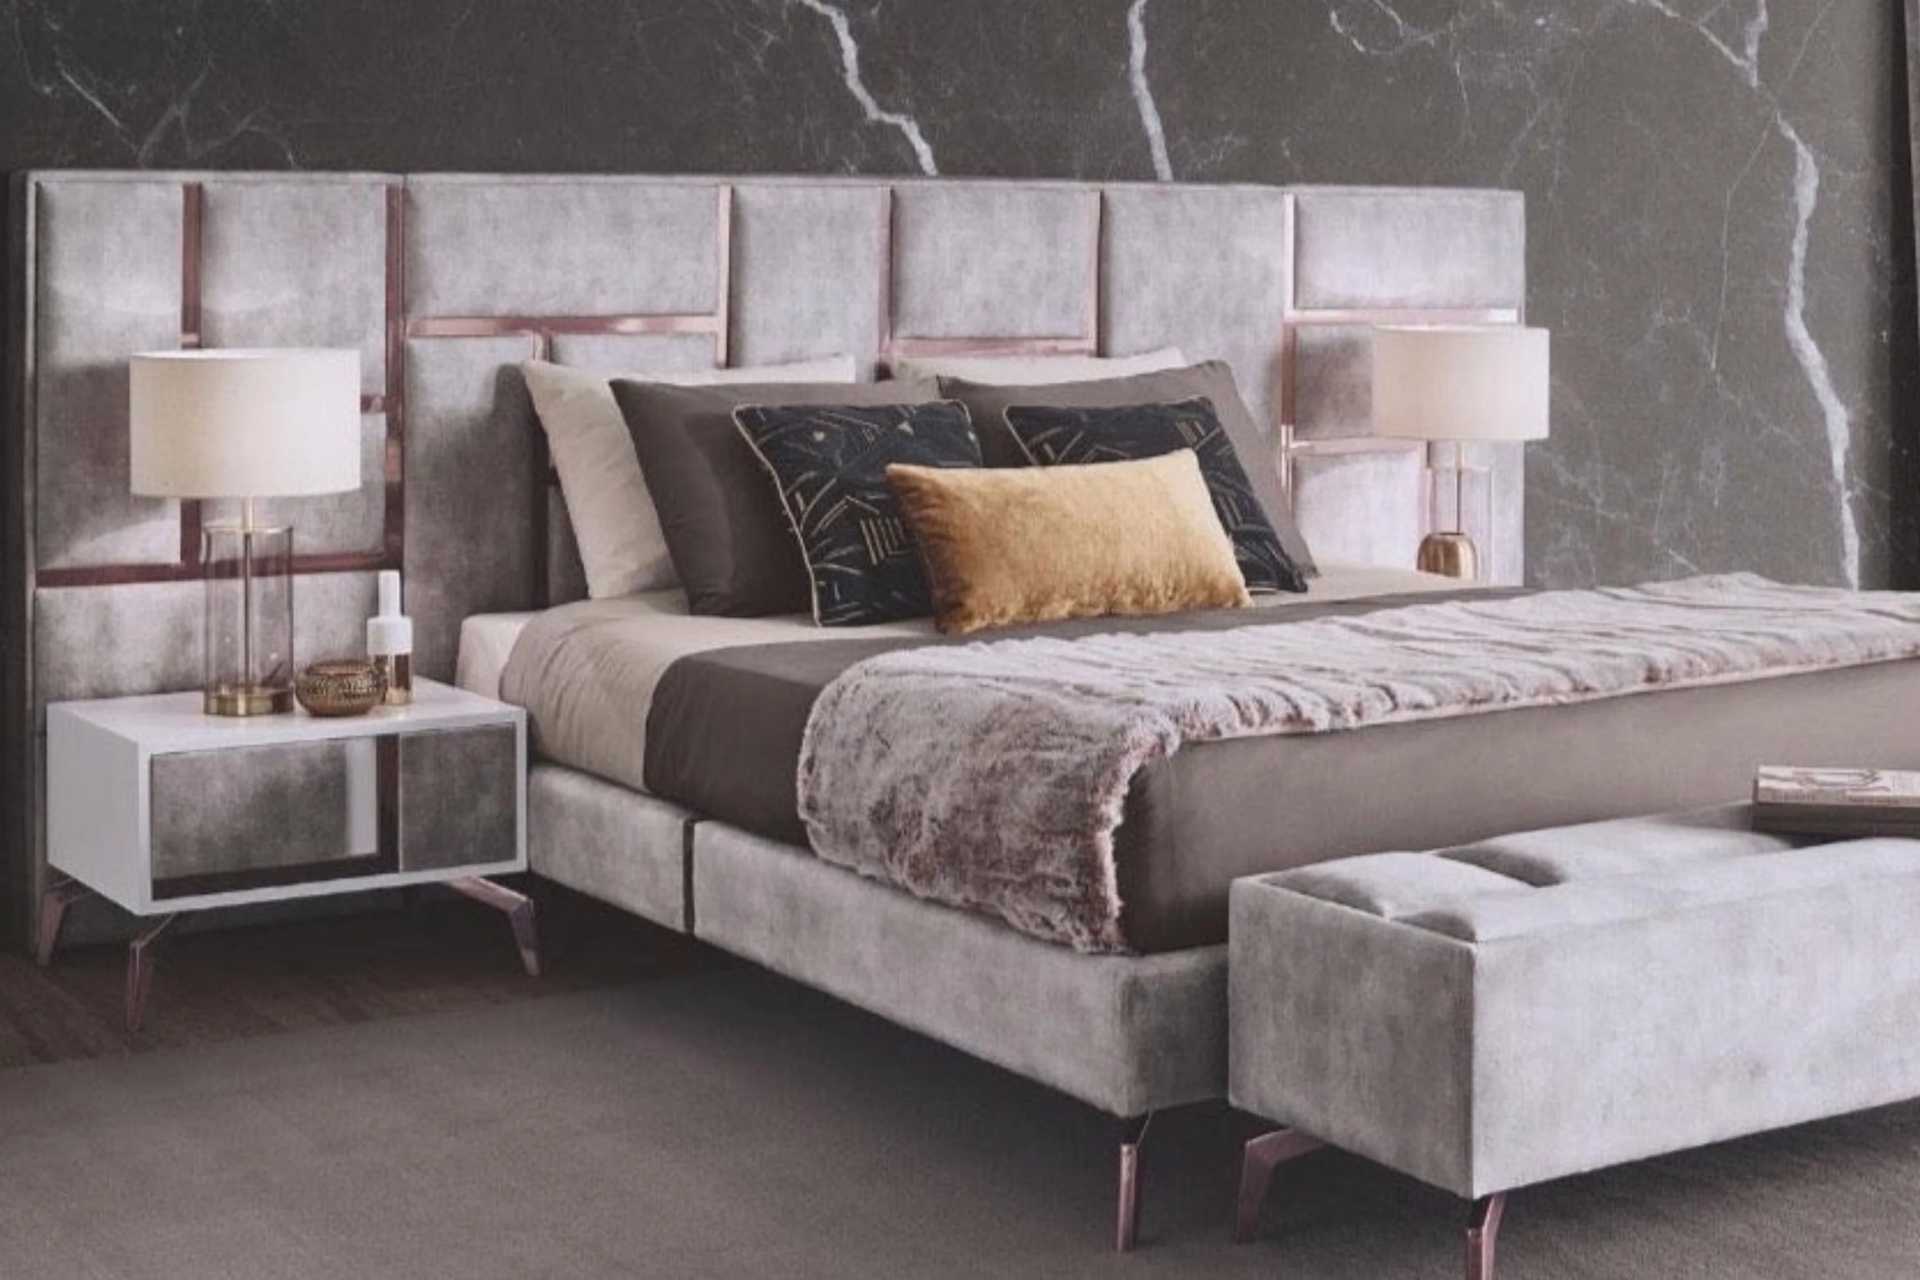 Grey and rose gold headboard and base bed set includes two bedside tables.